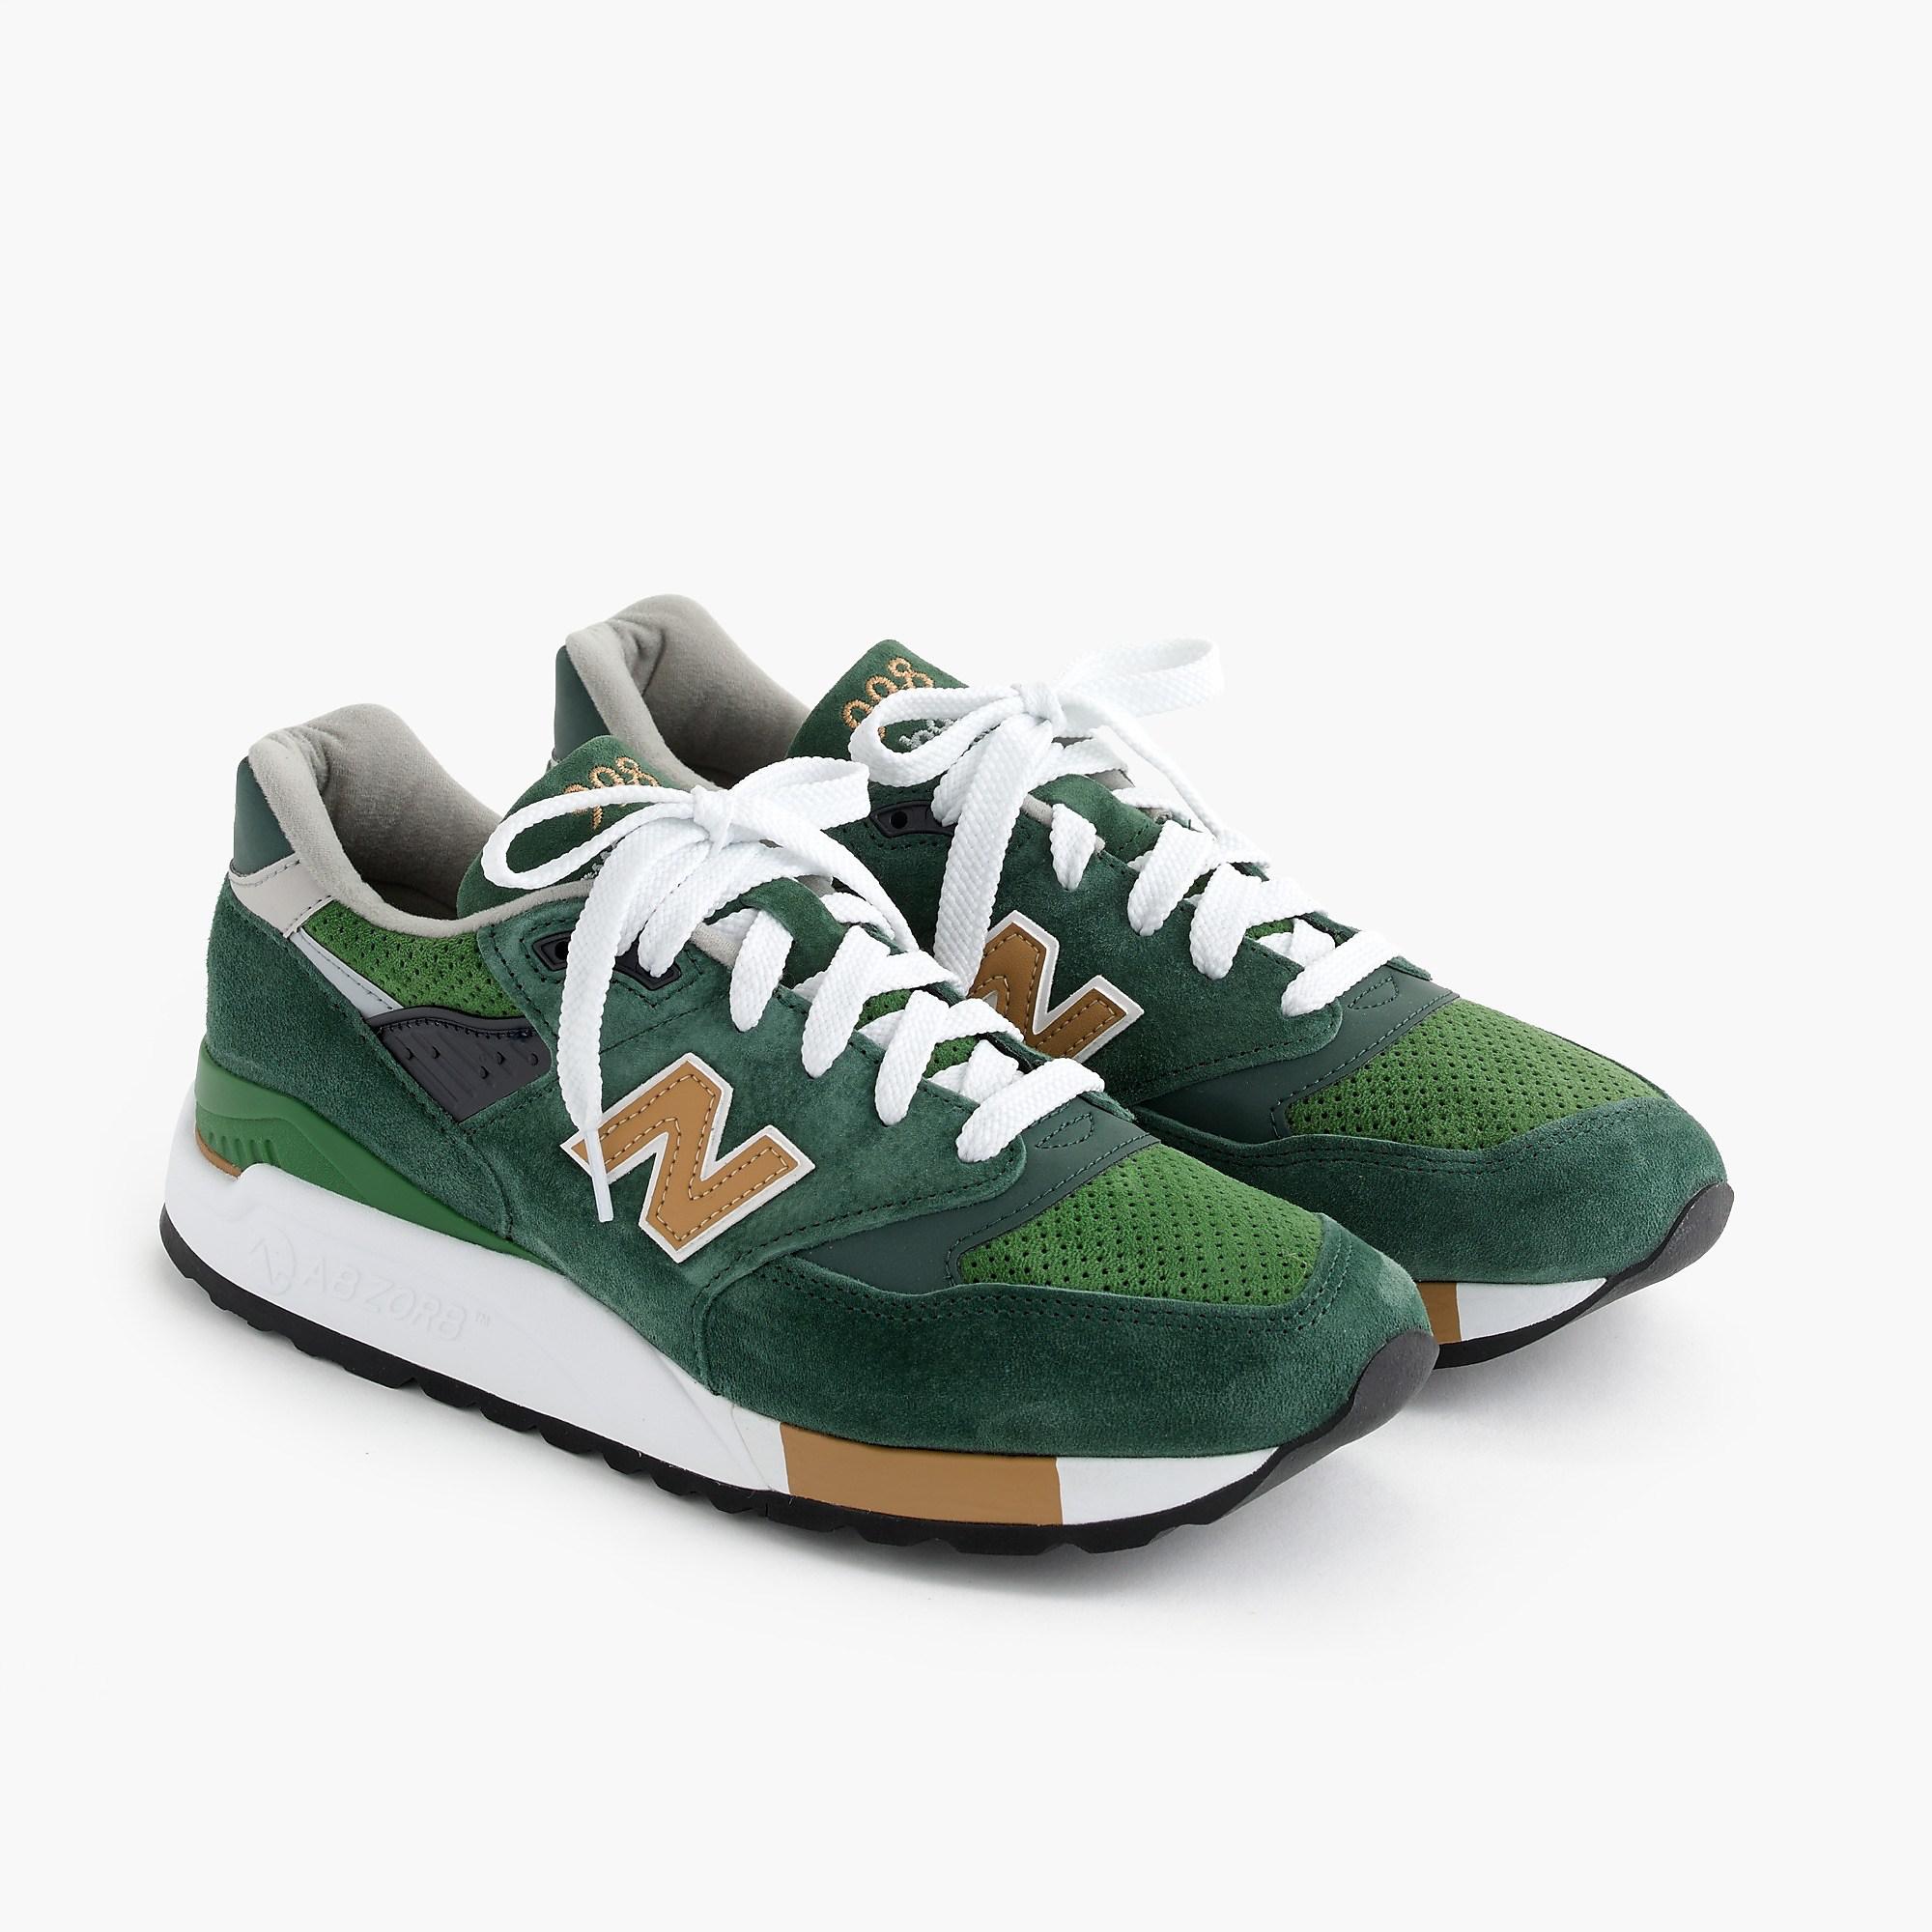 New Balance Suede 998 Greenback Sneakers for Men - Lyst